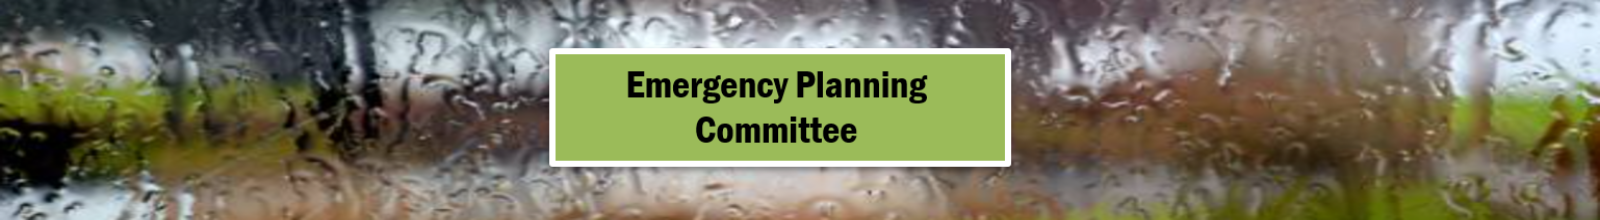 Heavy rainfall on glass with words Emergency Planning Committee